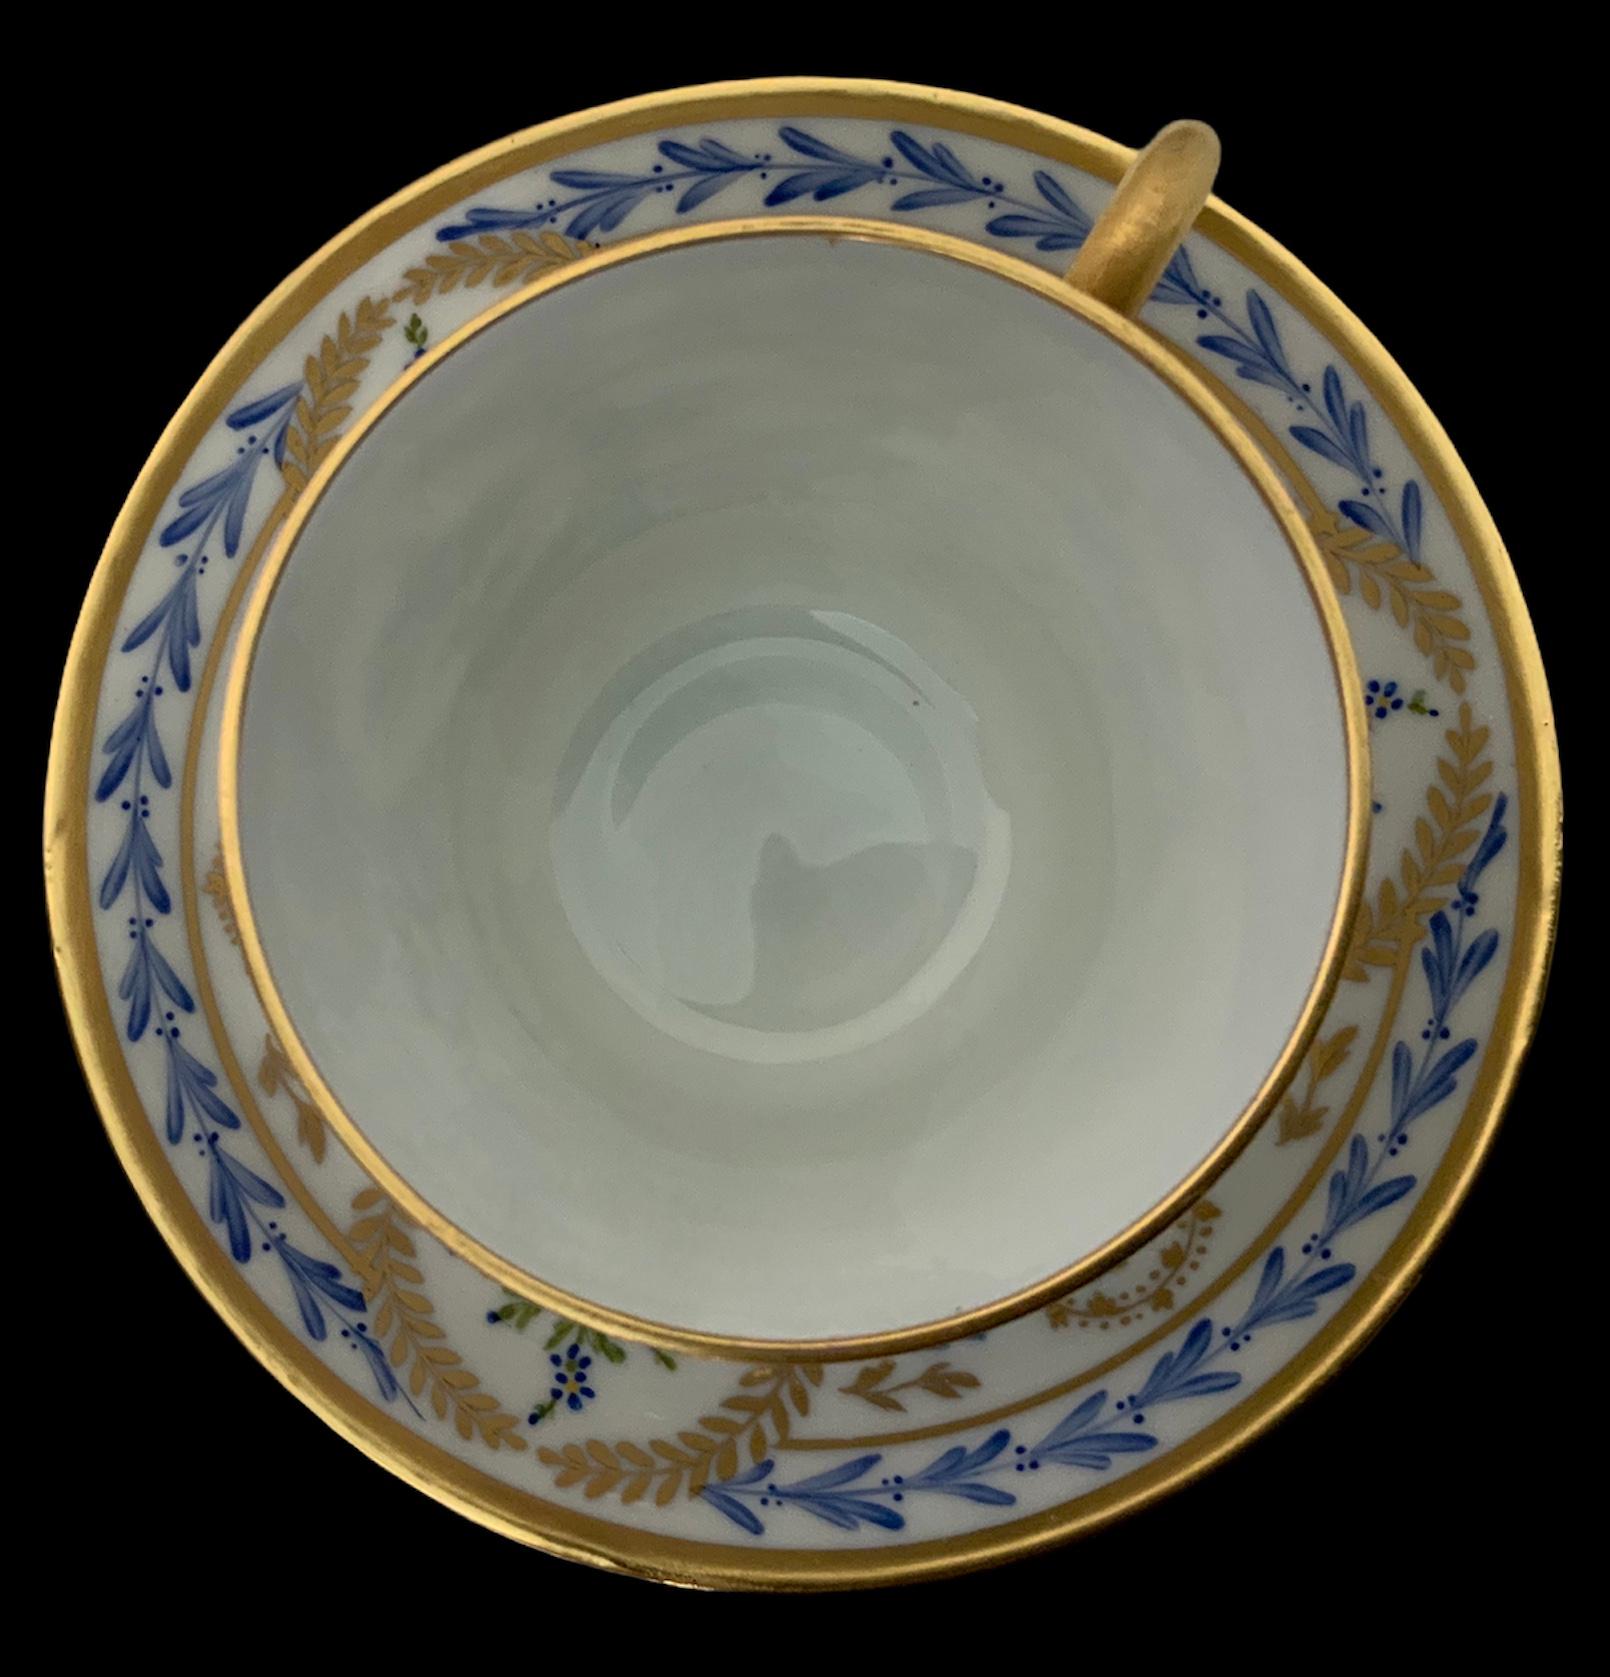 This a Limoges hand painted porcelain demitasse and saucer. It is adorned with a blue laurel garland alternated with a garland of gilt & blue leaves. In the center of it, there is some branches of blue forget me nots flowers surrounded by a gilt